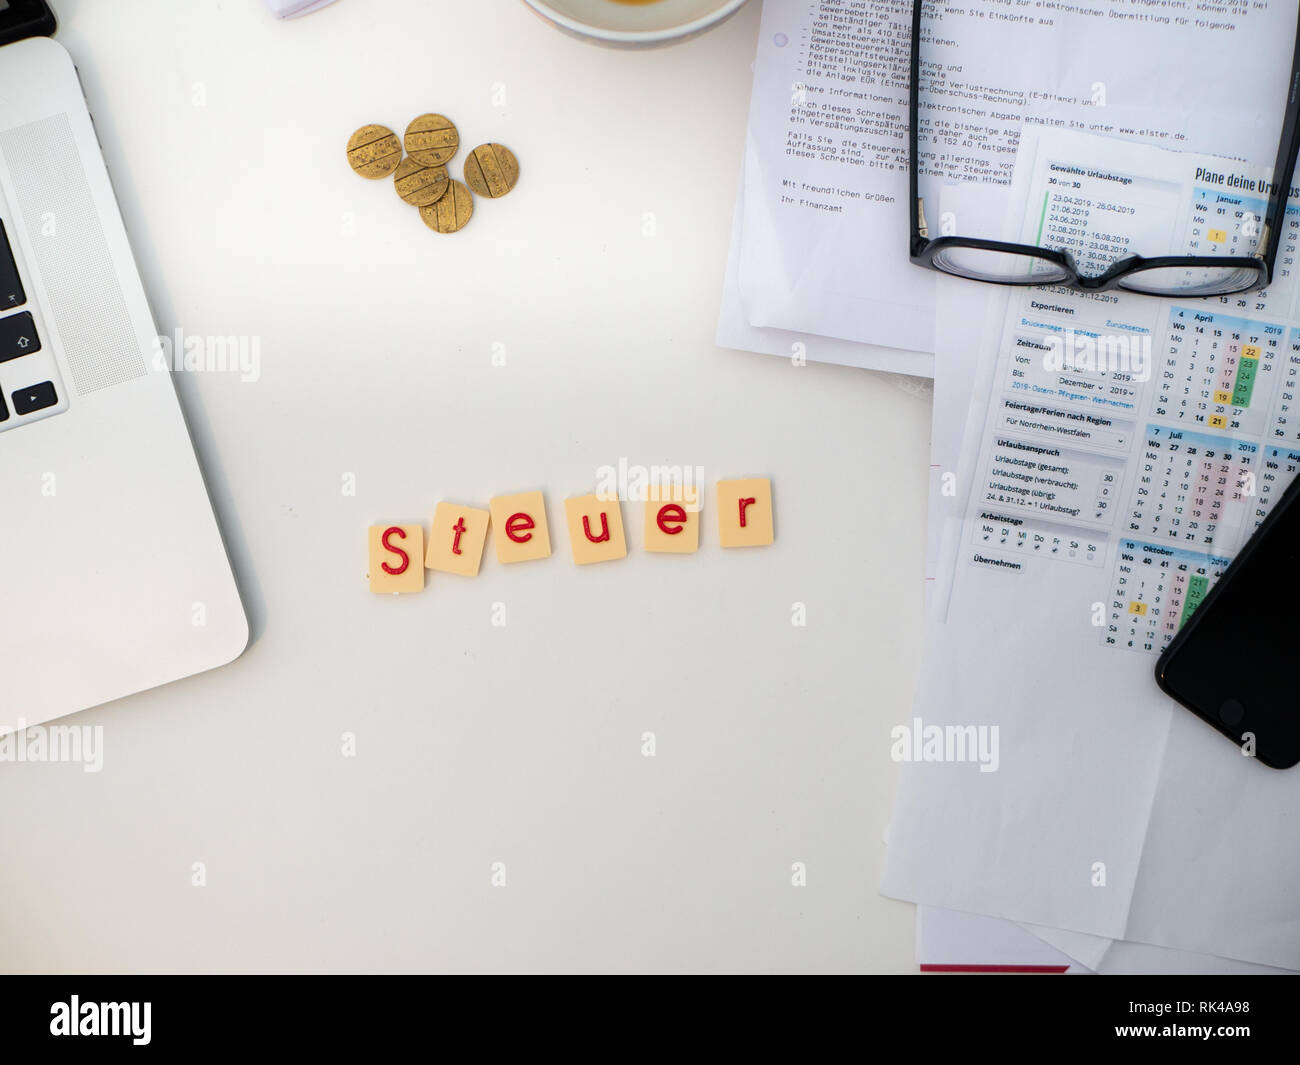 Top view of white desk with documents, glasses, notebook and letters saying 'Steuer'  (Tax) Stock Photo